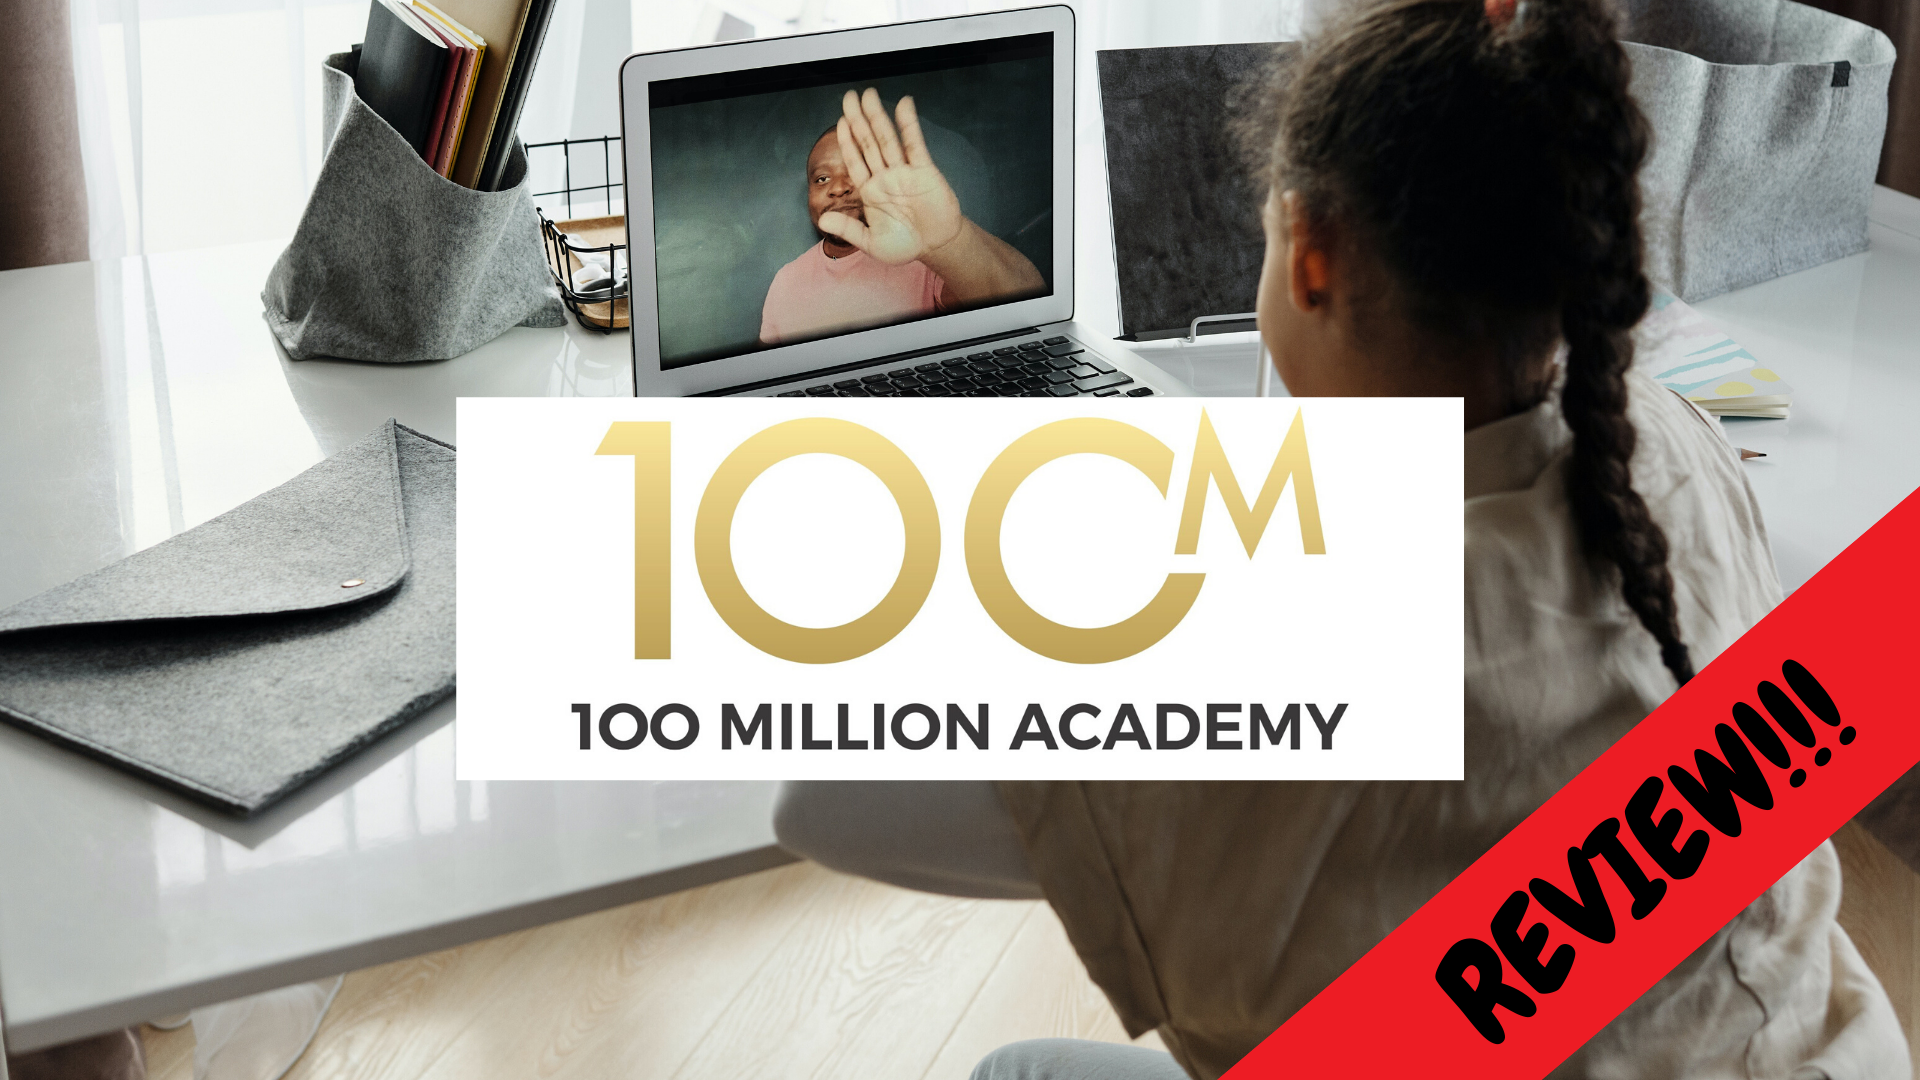 Is 100 Million Academy a Scam